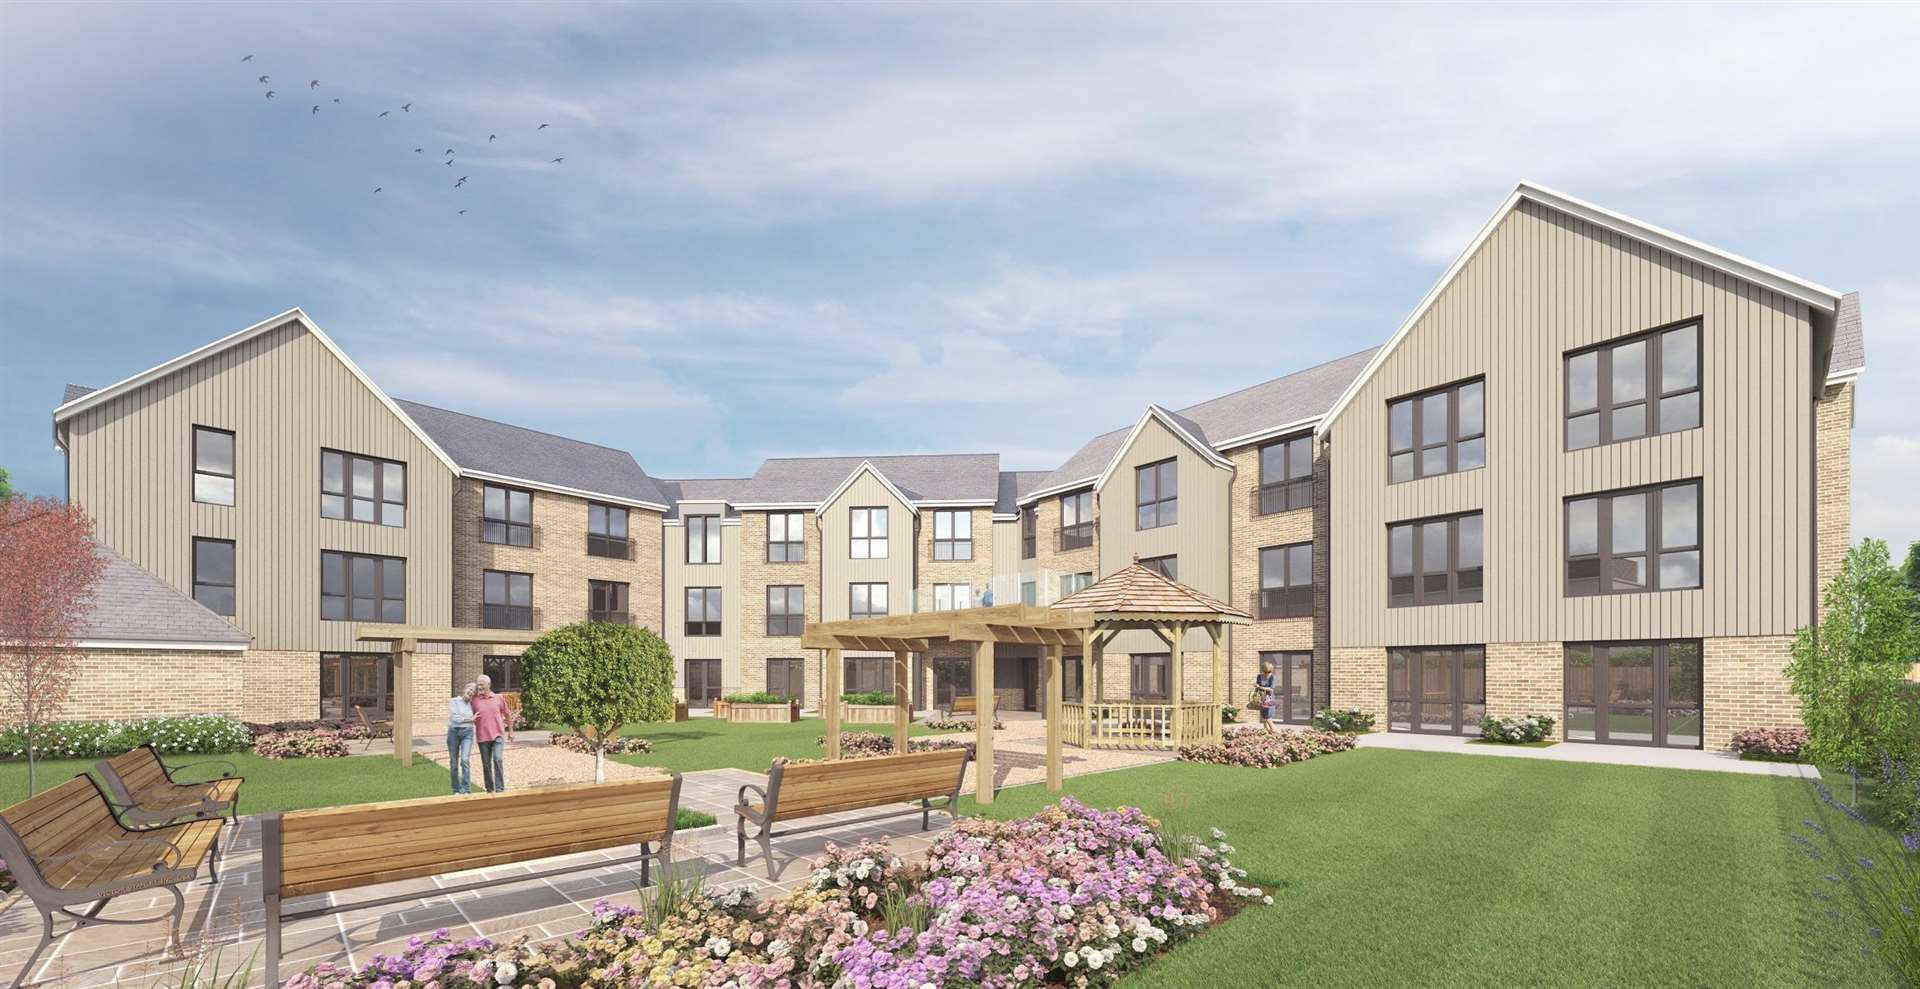 Plans for a 68-bed care home near the William Harvey Hospital